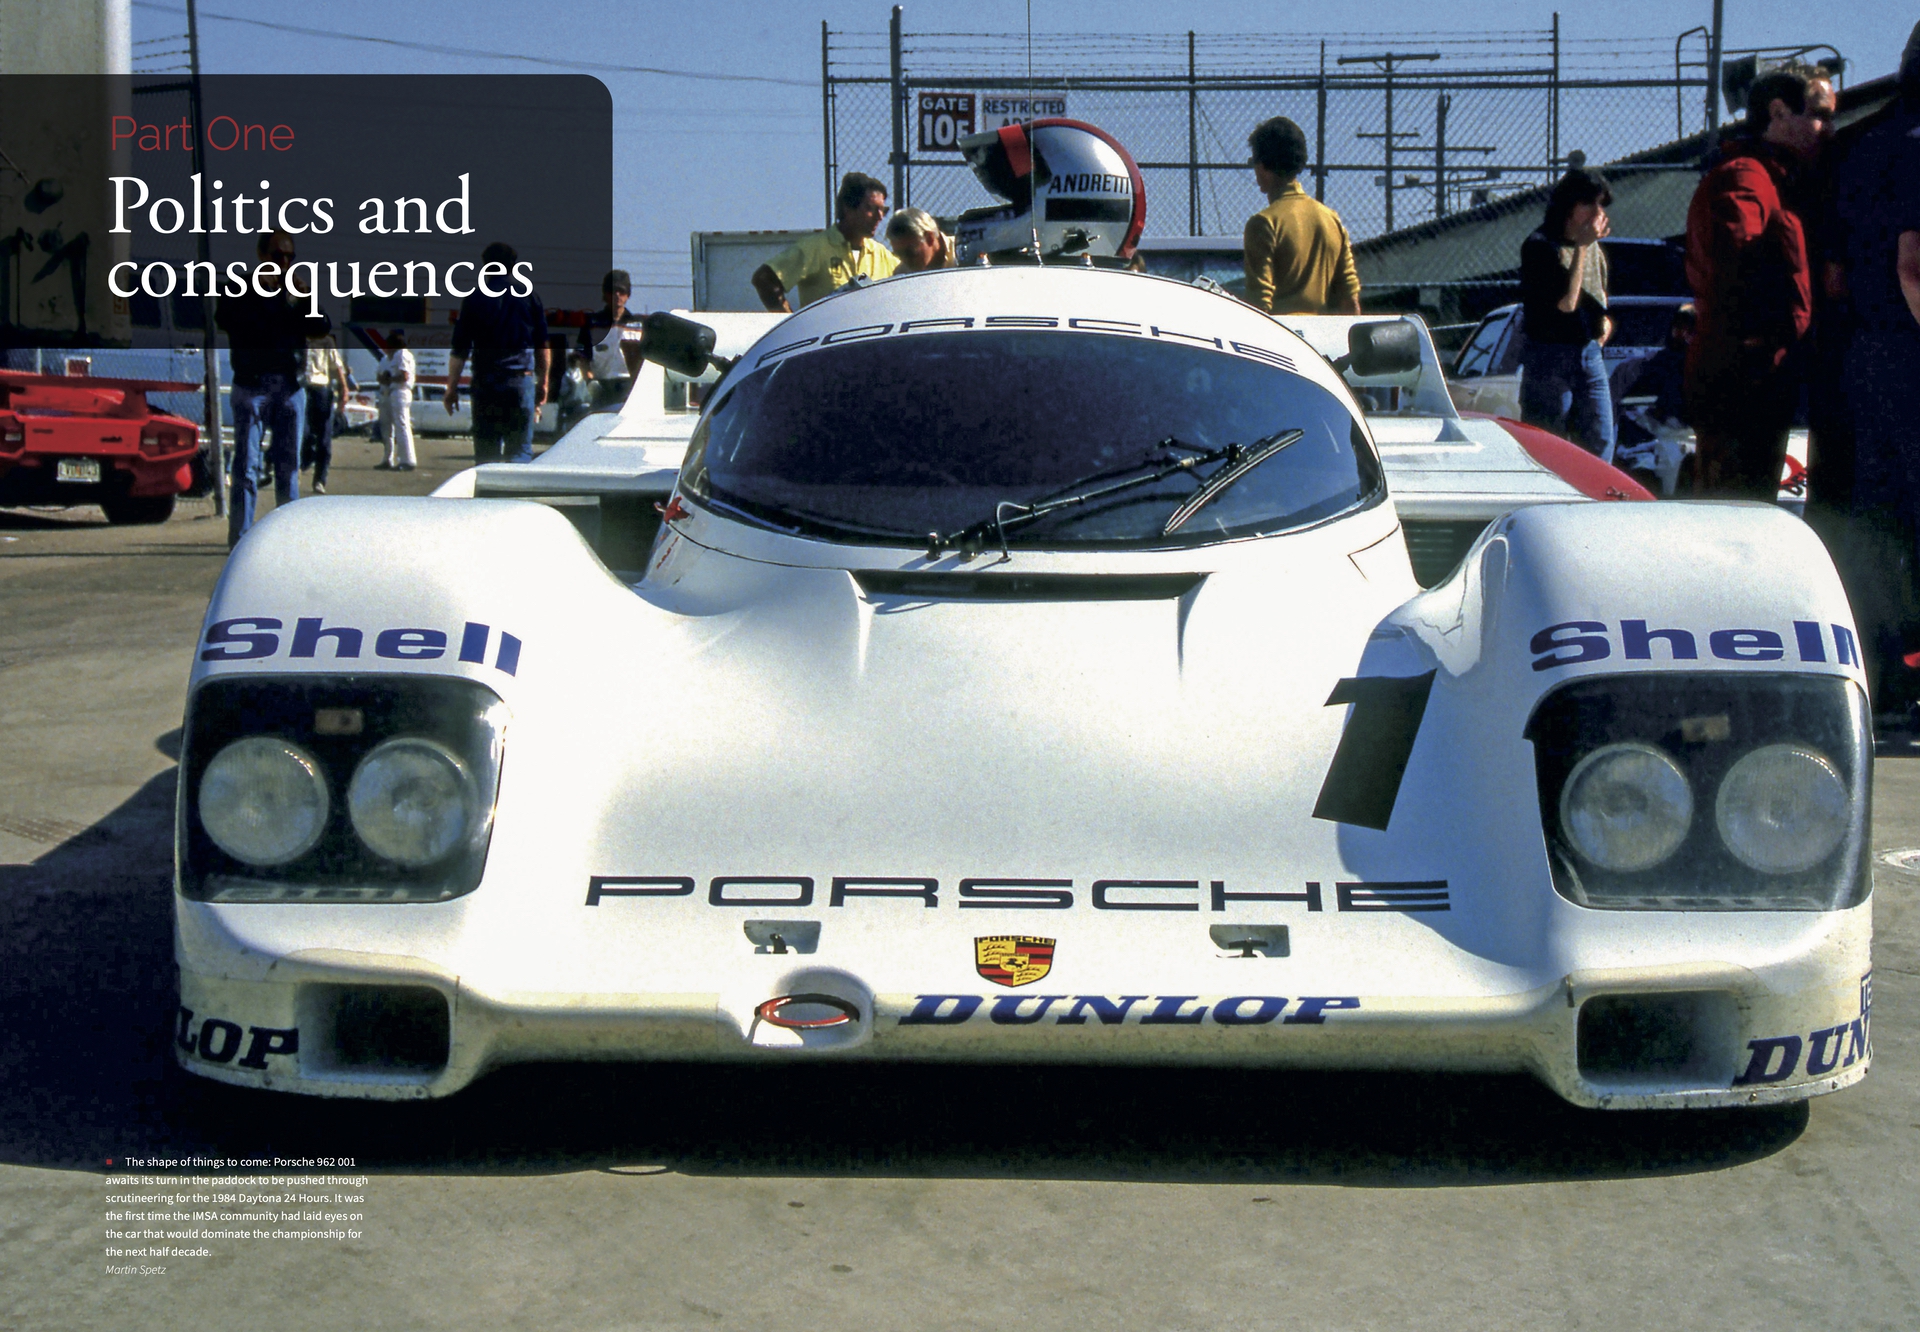 Page from Ultimate Works Porsche 962 - The Definitive History featuring Politics and Consequences section